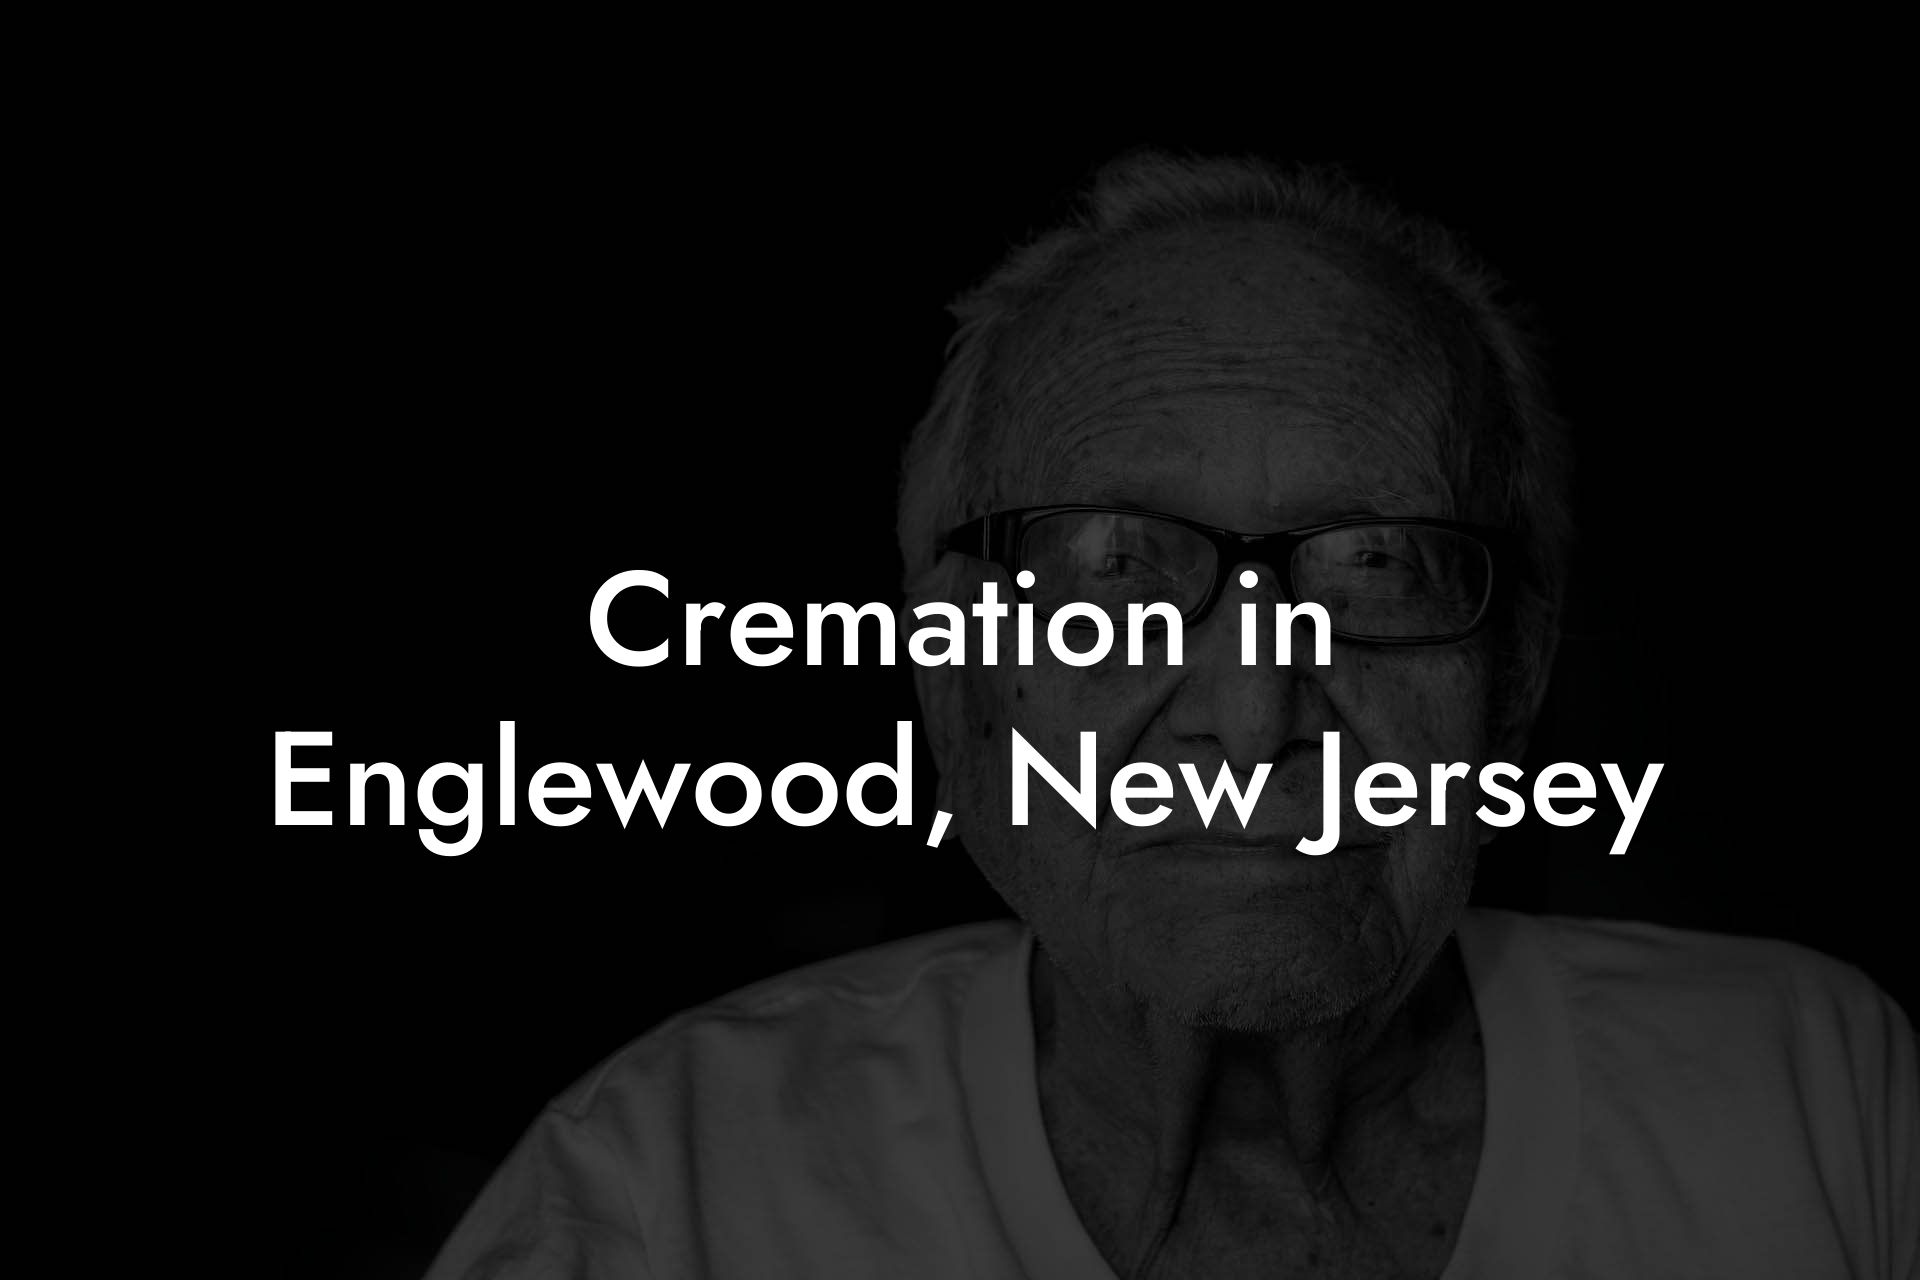 Cremation in Englewood, New Jersey